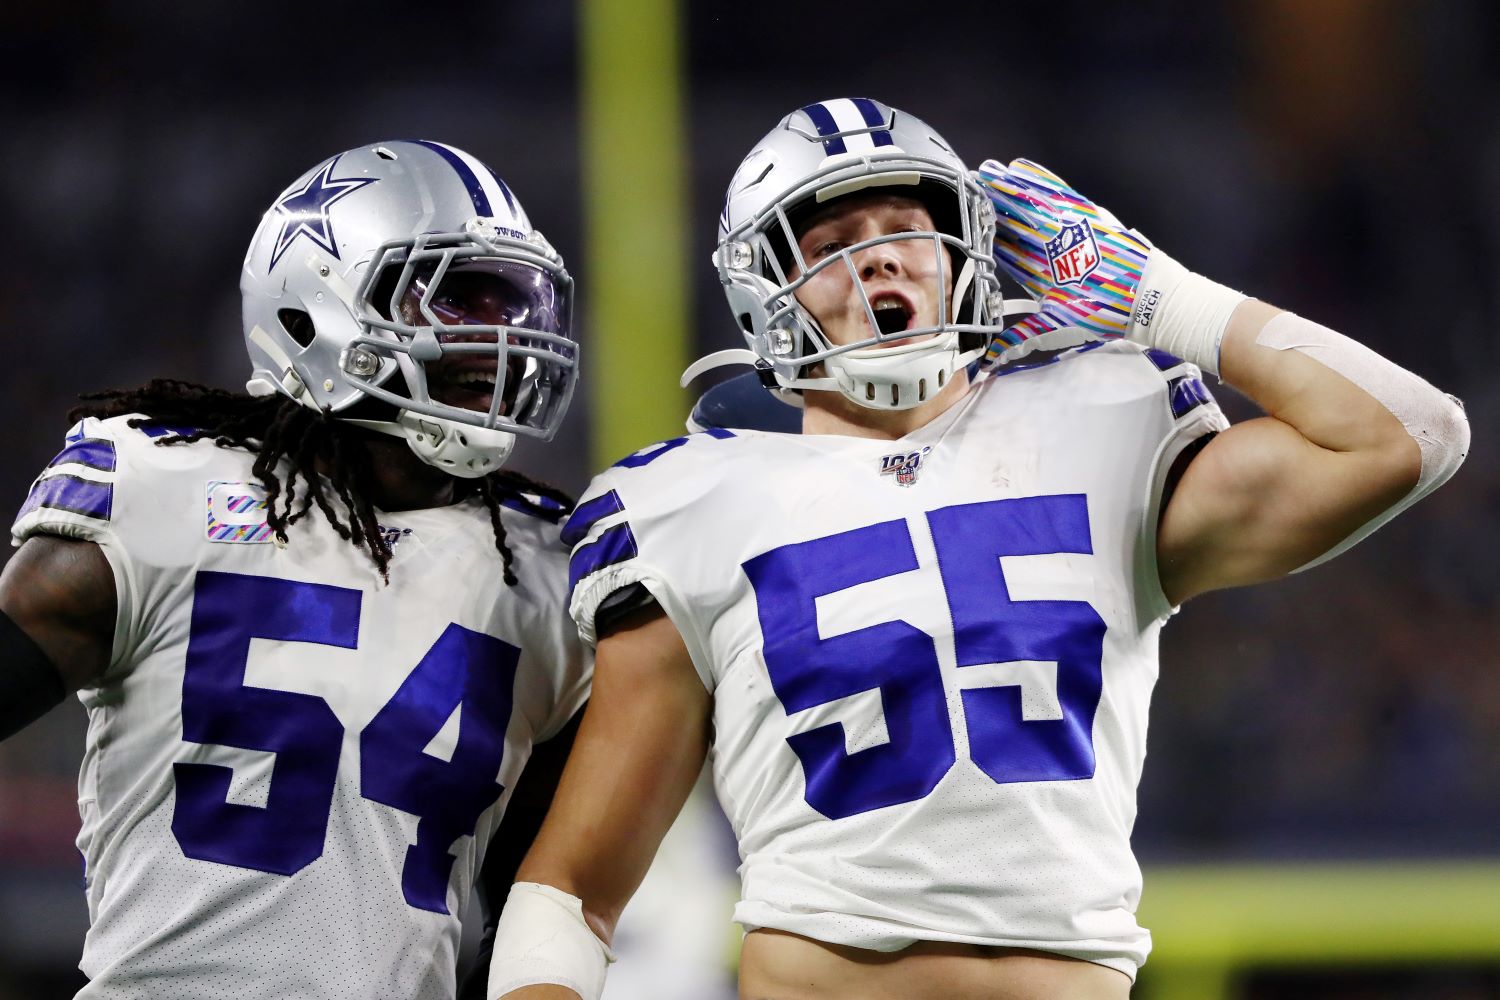 Leighton Vander Esch just called out his Cowboys teammates with a stern message. Can Dallas turn its season around, or is it too late?